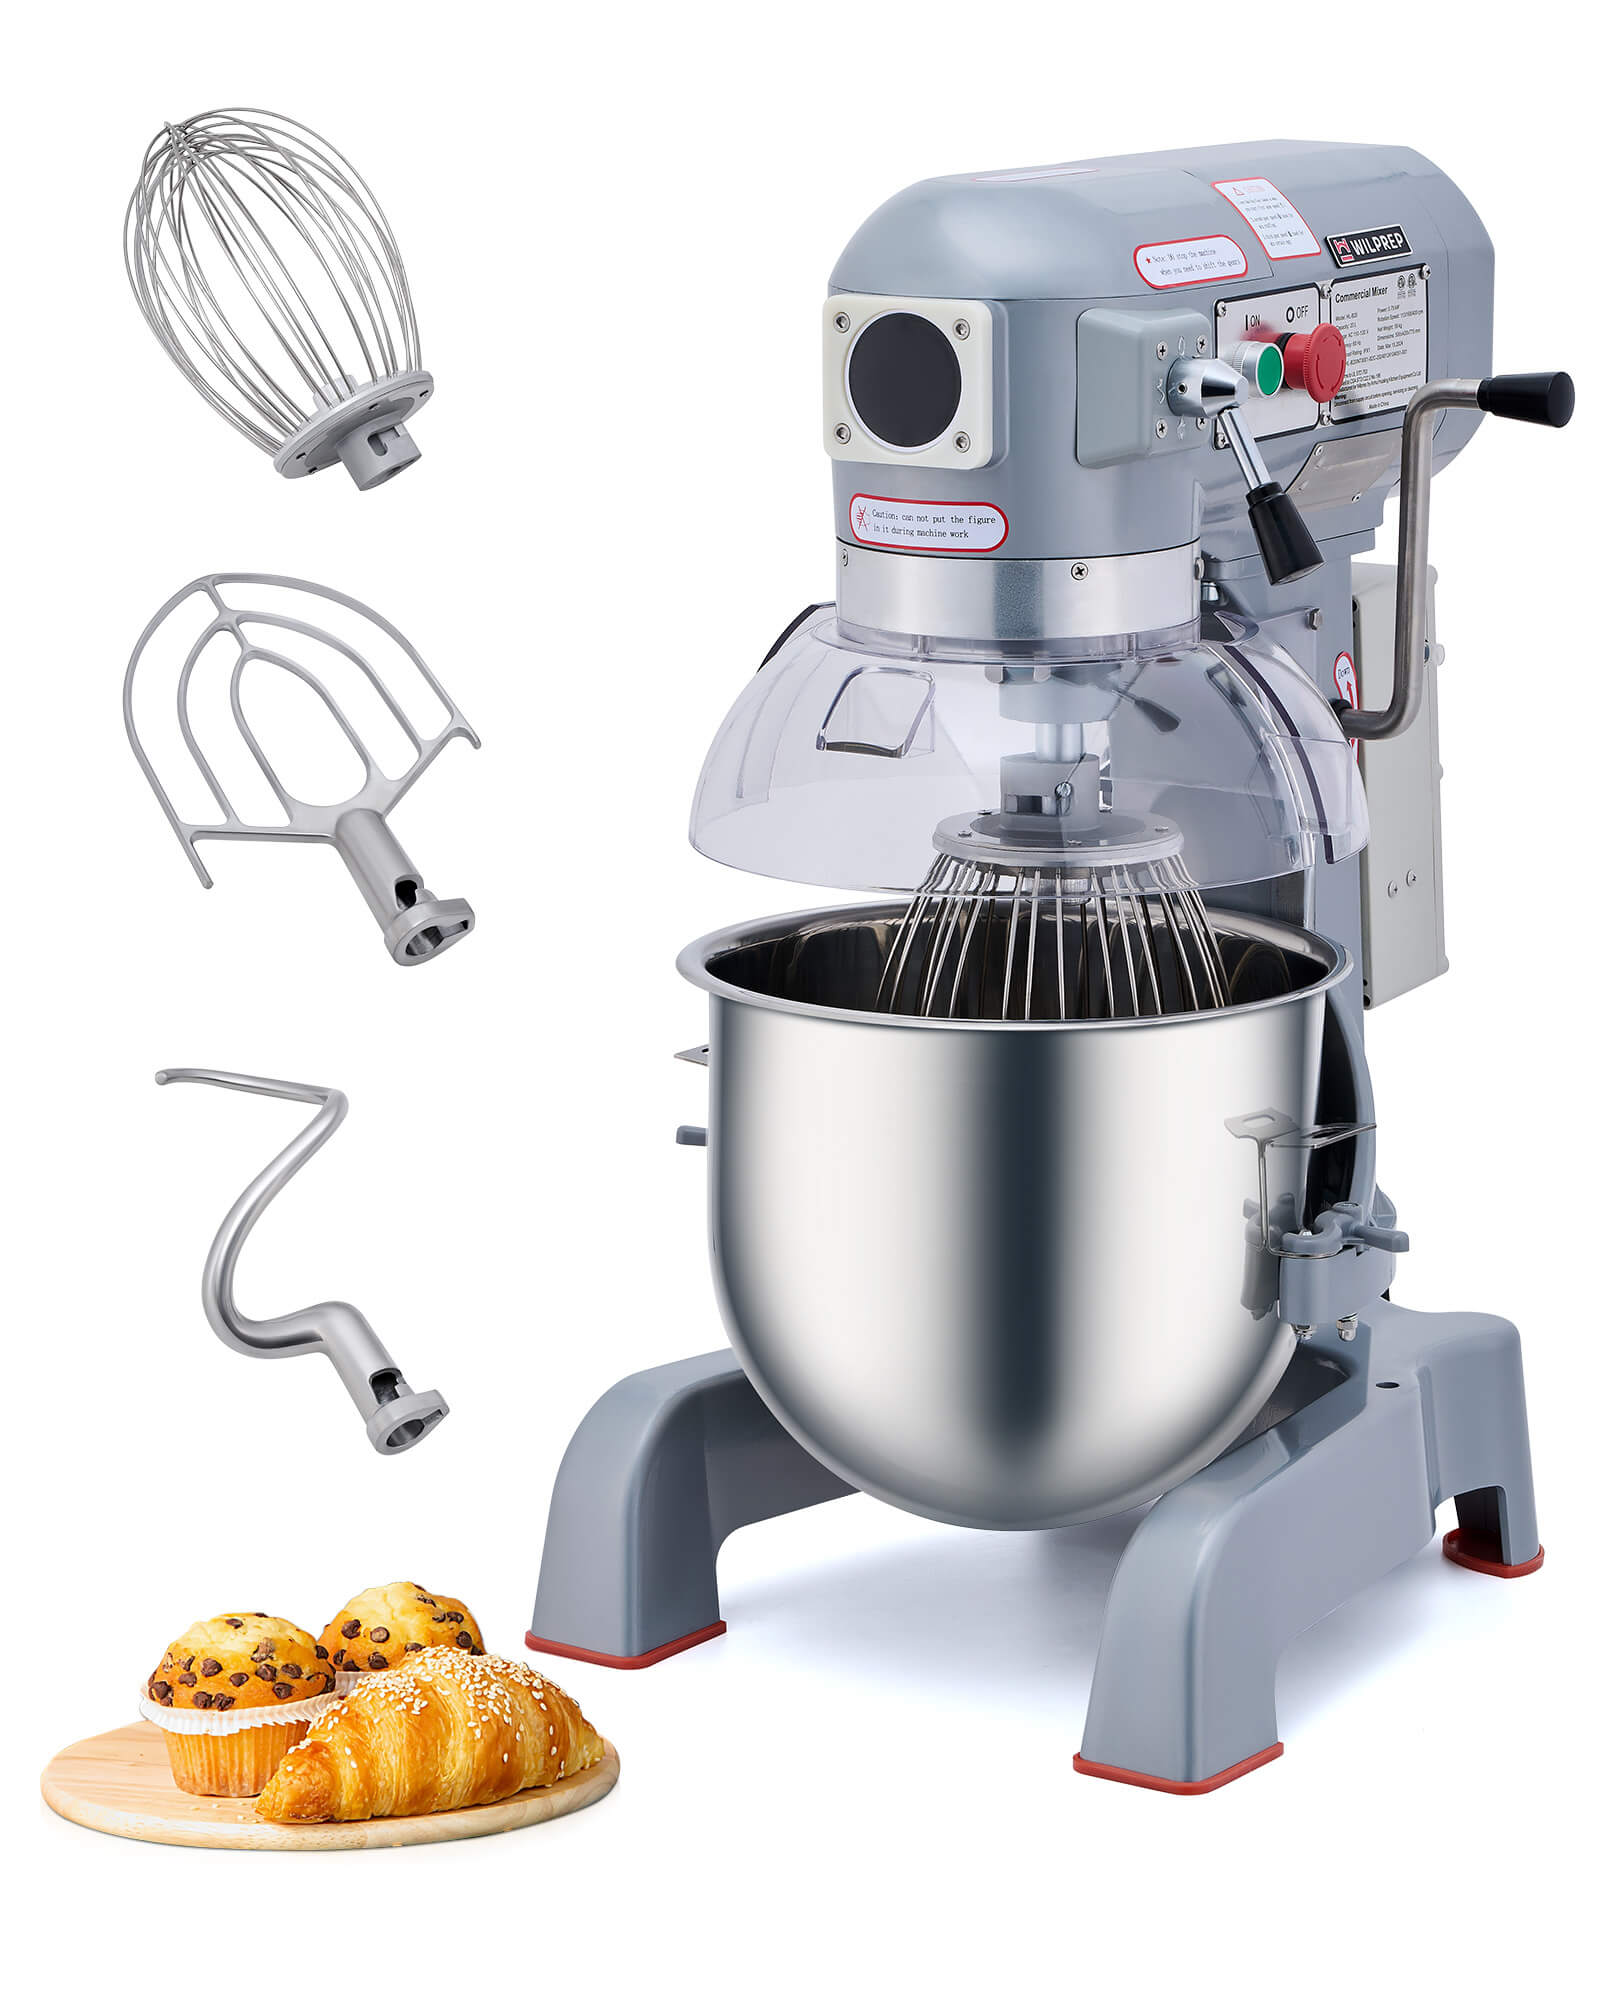 20 qt Commercial Mixer, 750W 3 Speed with Dough Hook Beater Whisk